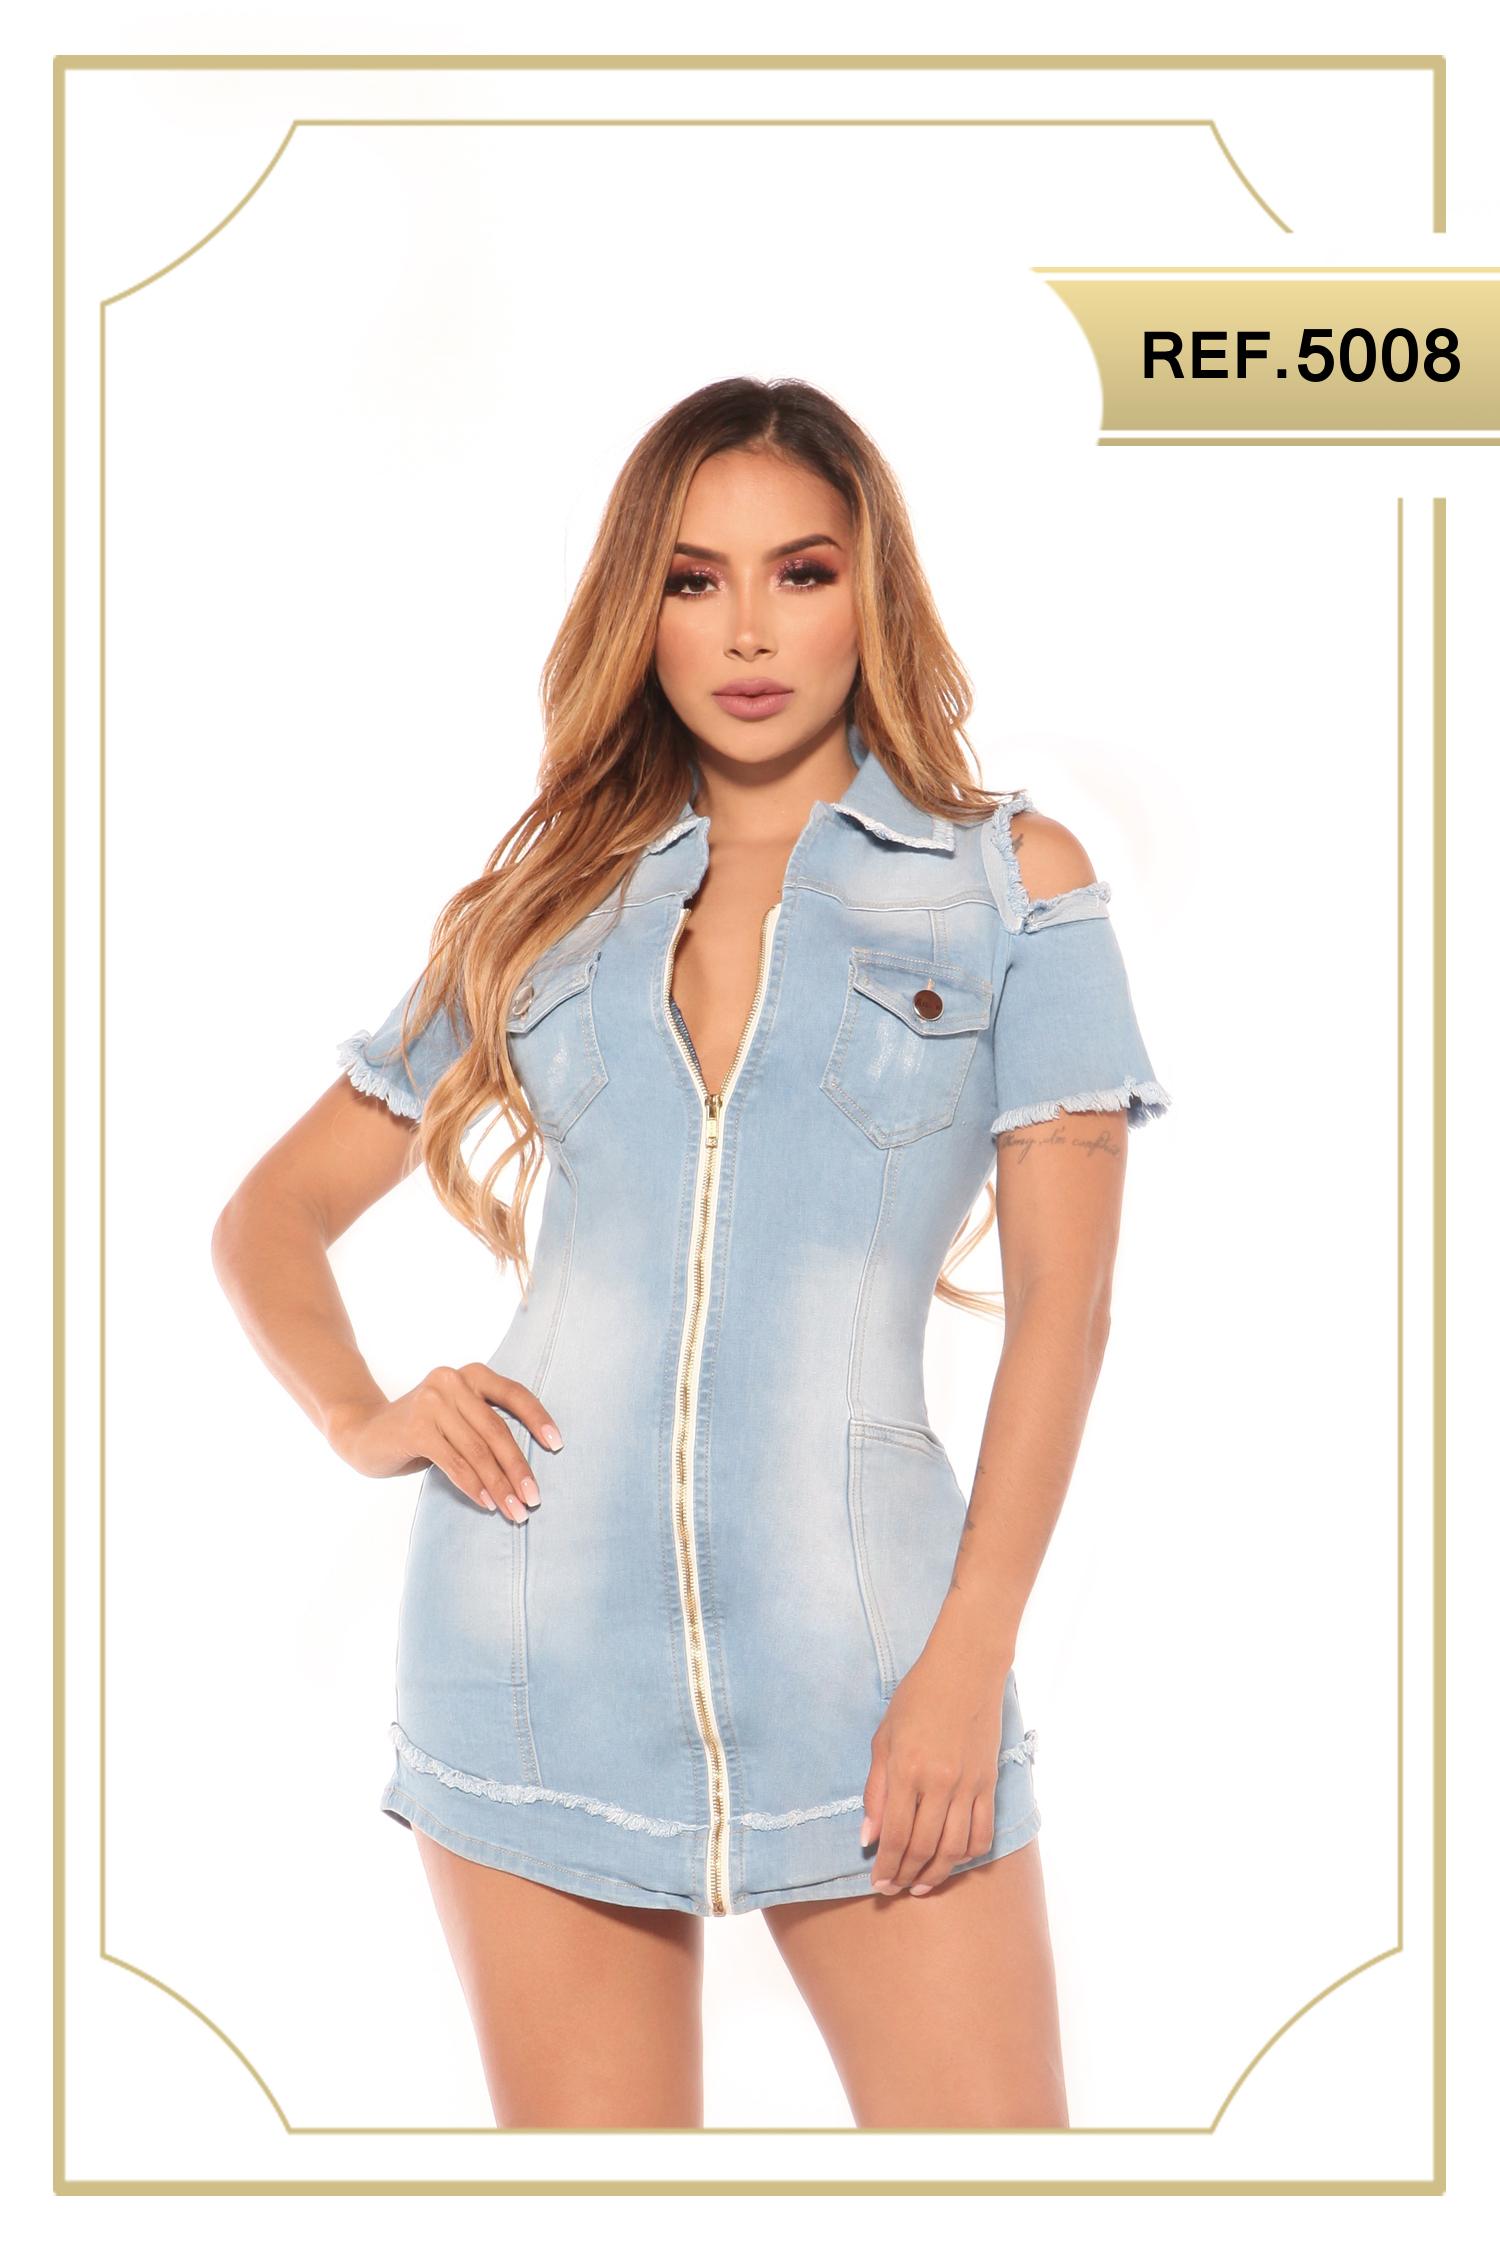 Short Jean Dress with Front Zip, Ice Blue Color and Decorative Front Pockets, Wear on Sleeves and Edges.